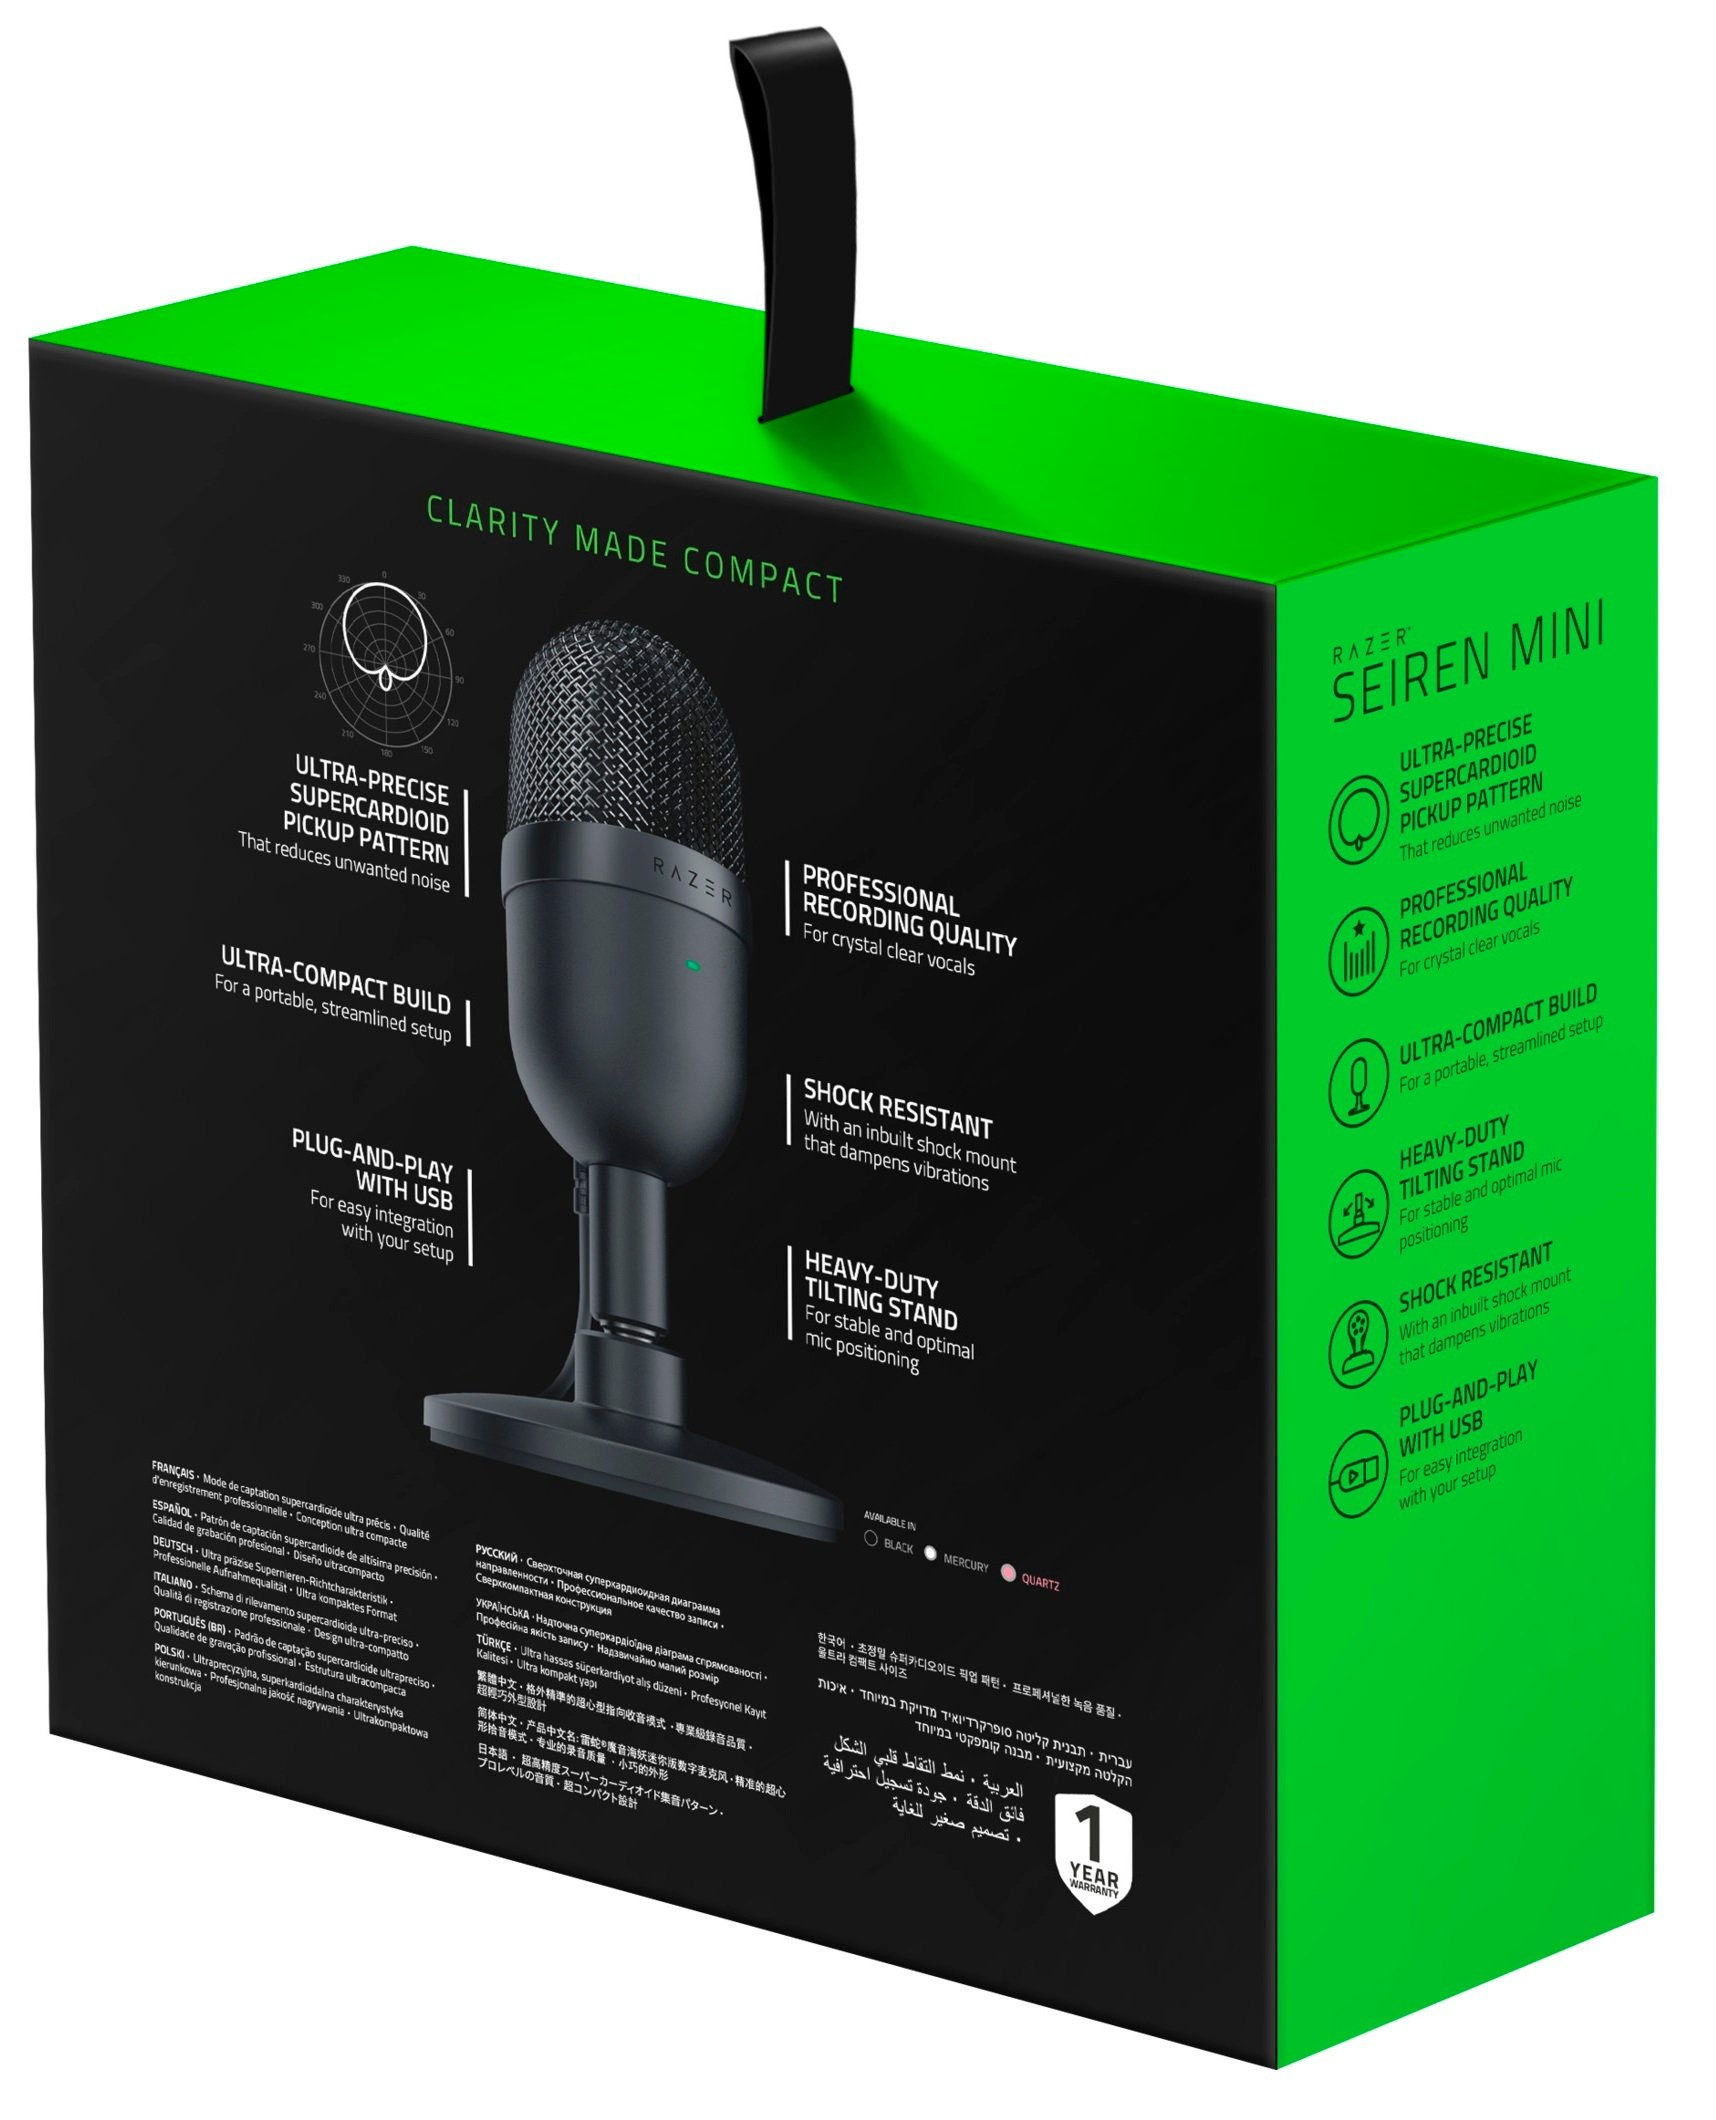 Razer Seiren Mini USB Condenser Microphone: for Streaming and Gaming on PC  - Professional Recording Quality - Precise Supercardioid Pickup Pattern 